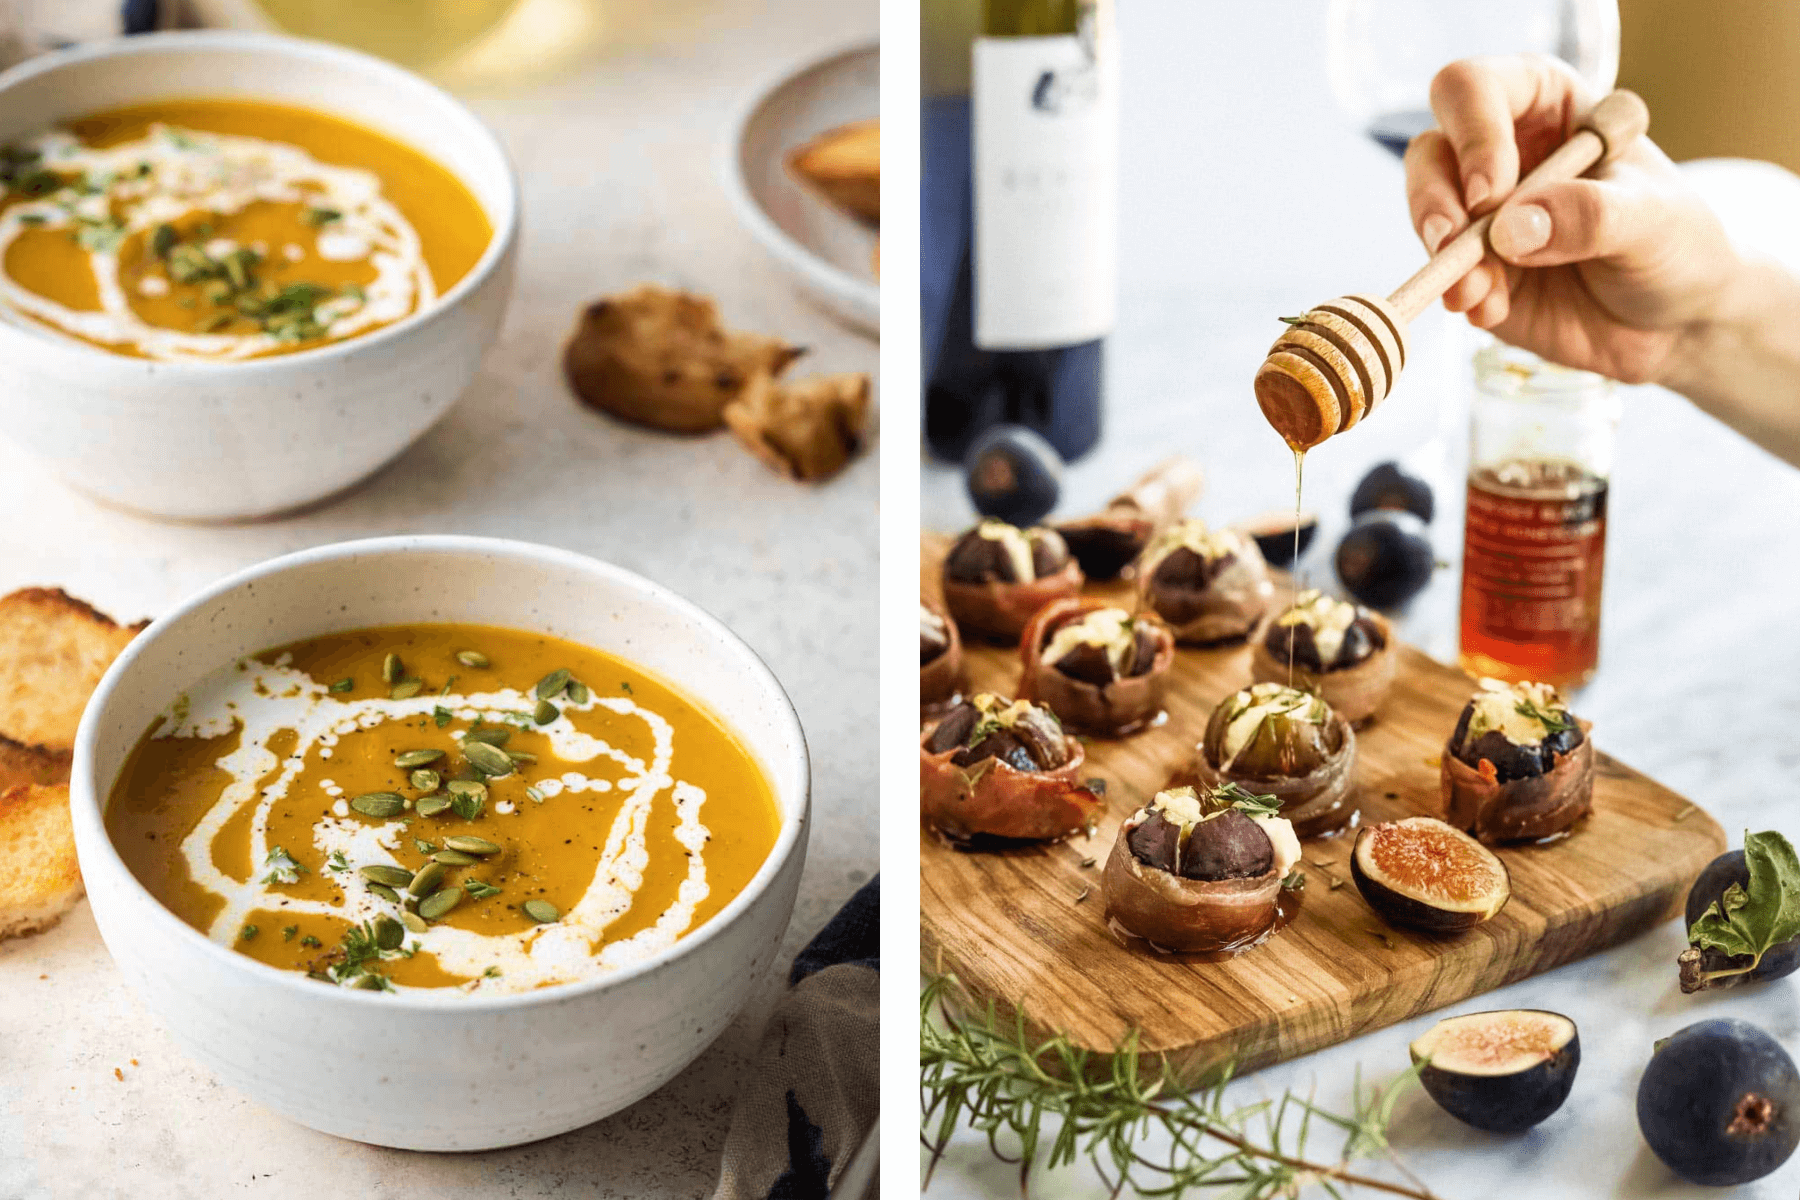 Left: Two bowls of butternut squash soup; Right: A hand dribbling honey on bacon-wrapped figs.